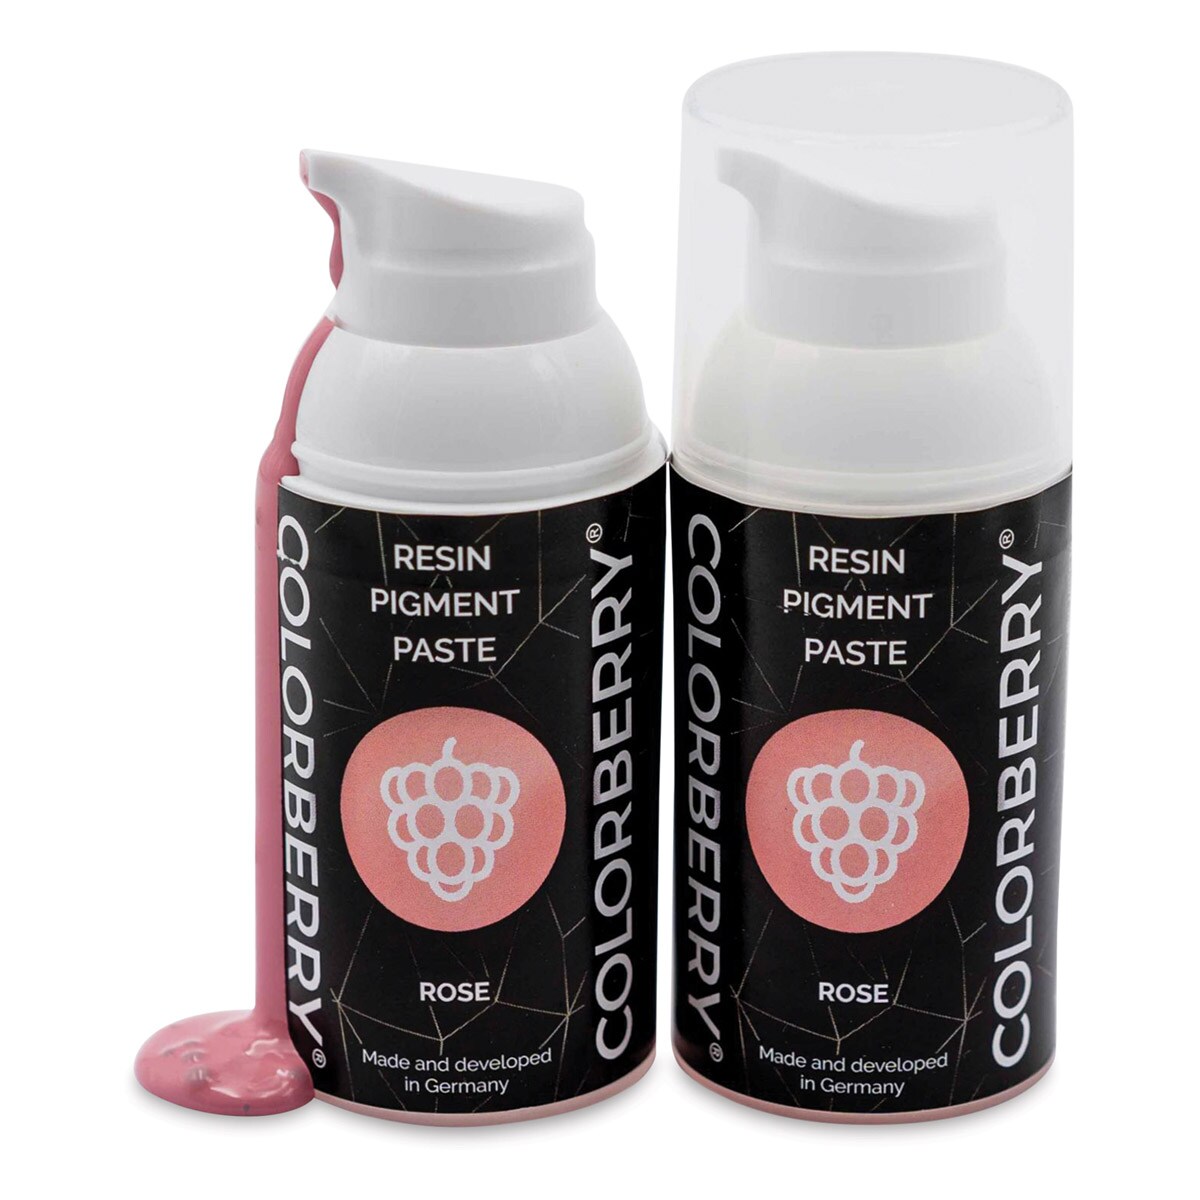 Colorberry Resin Pigment Paste - Rose, 30 ml, Bottle